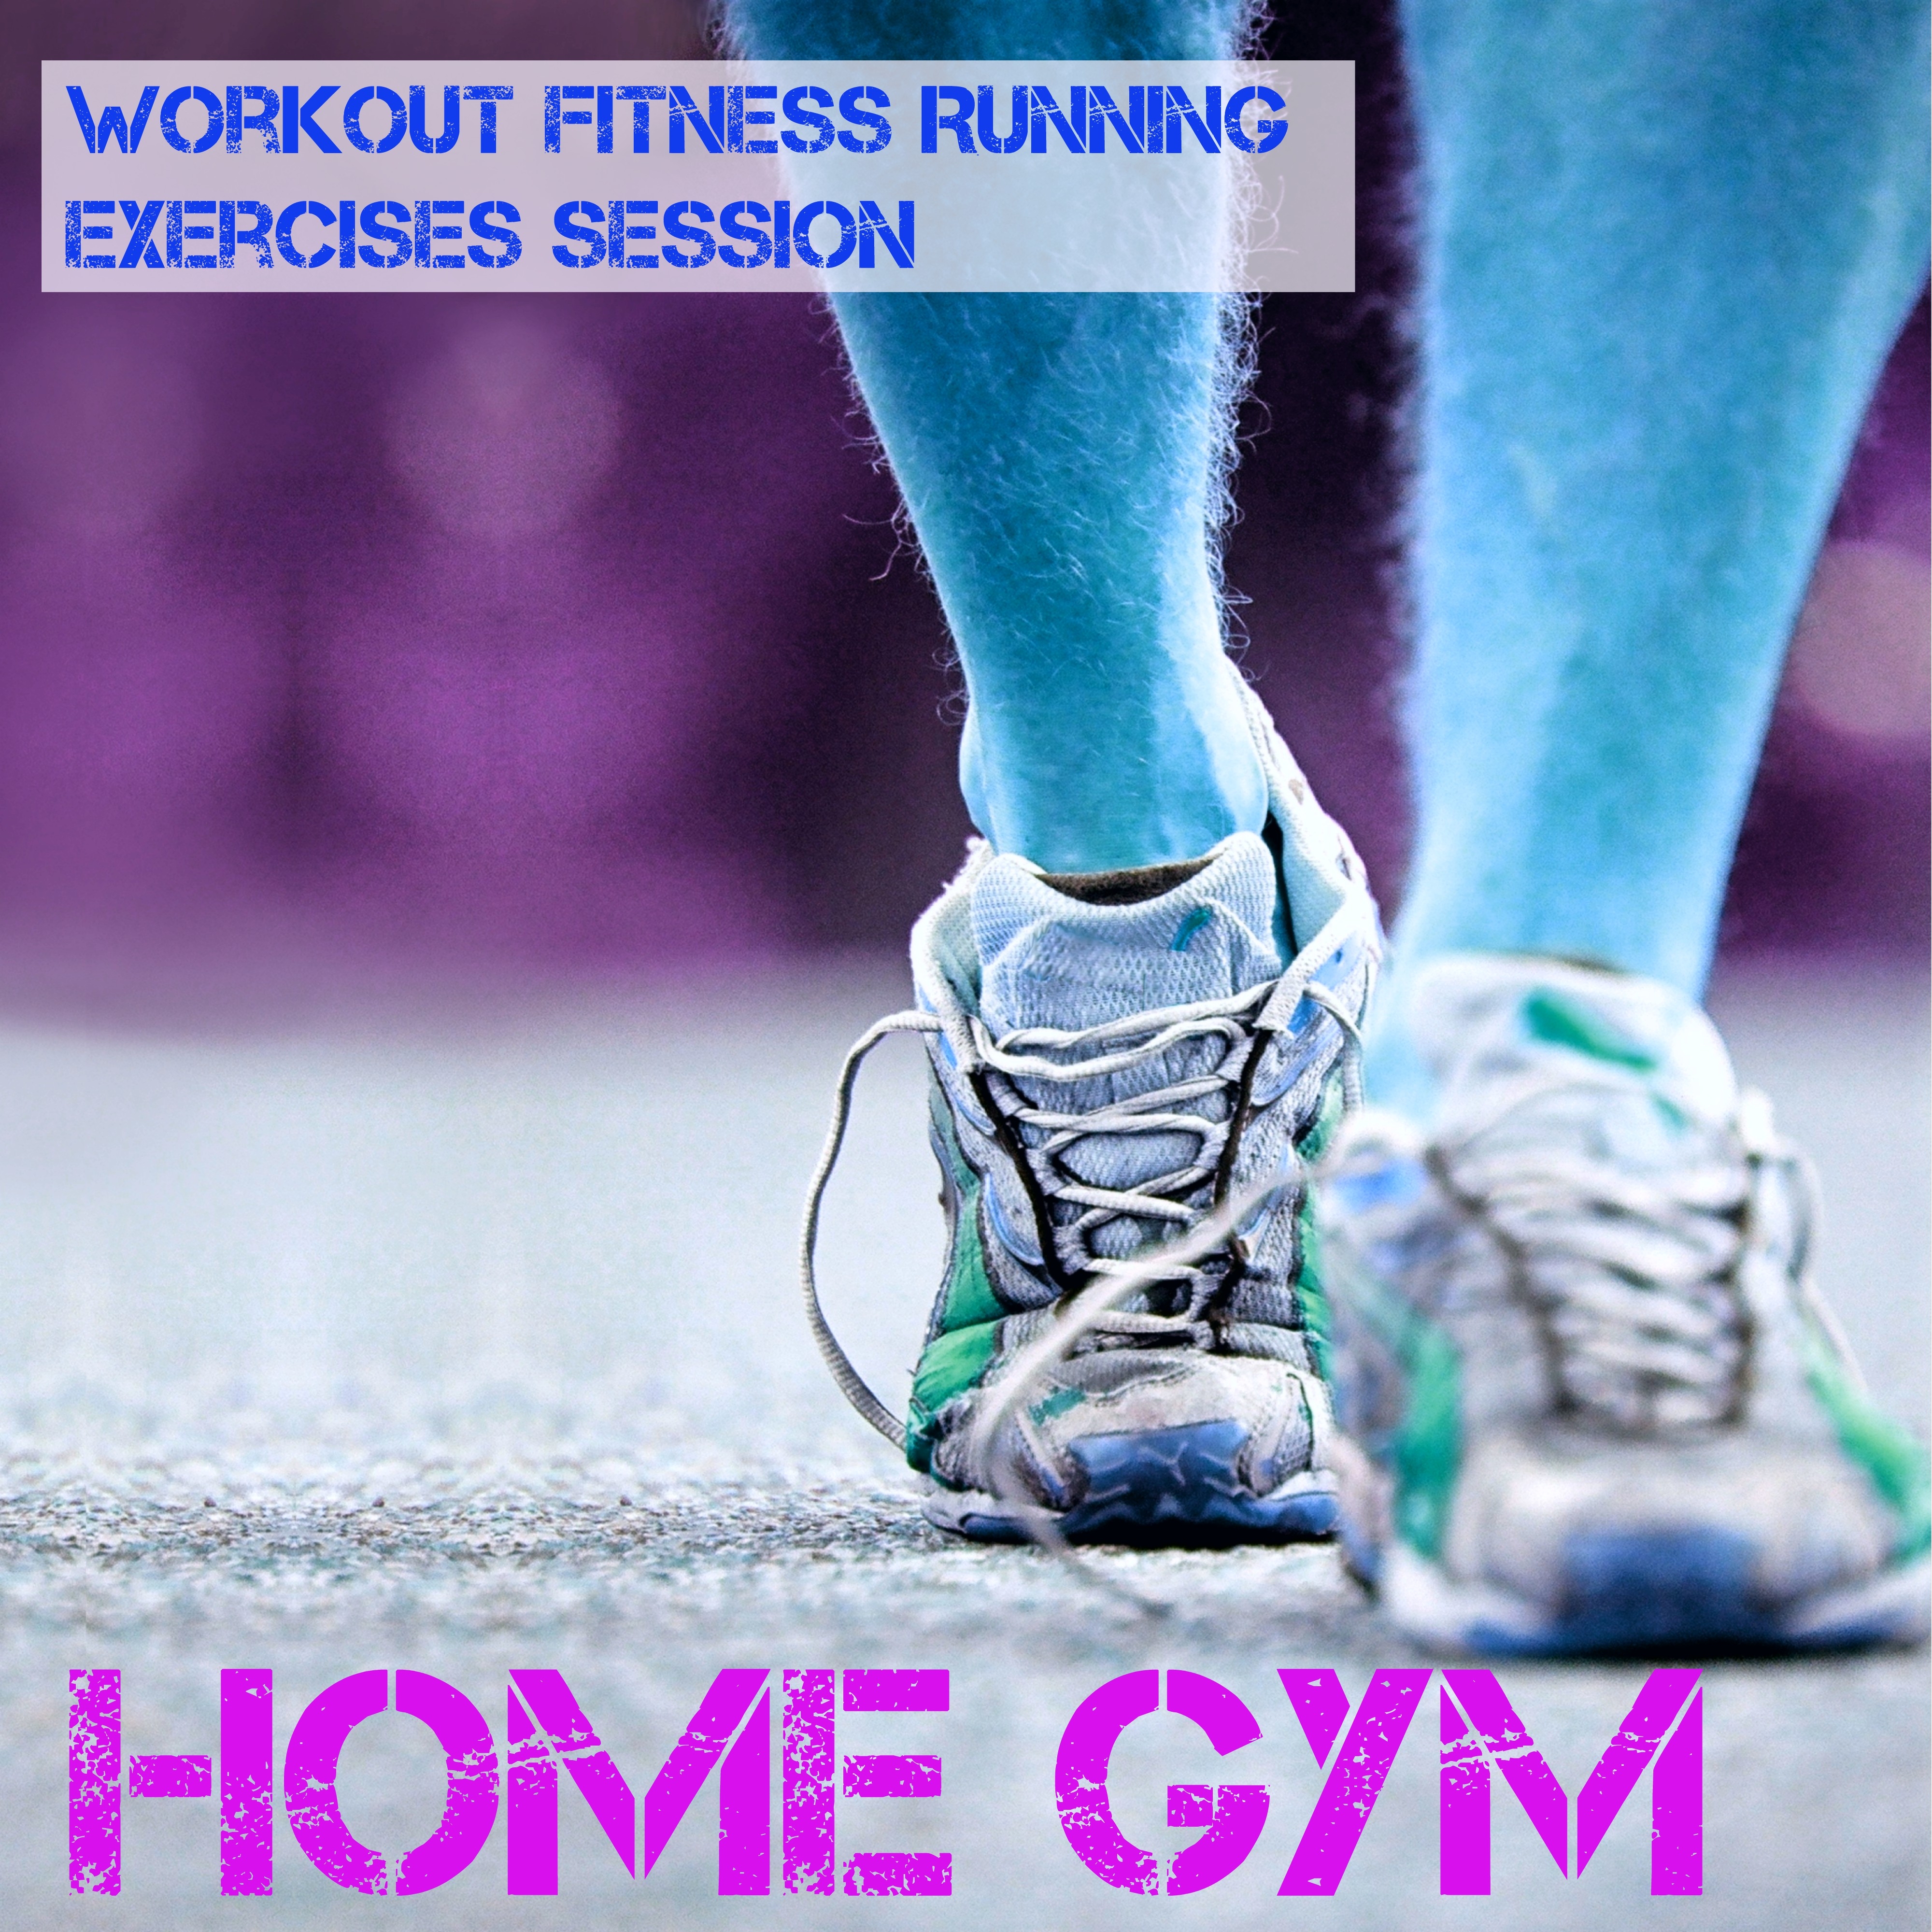 Home Gym - Workout Fitness Running Exercises Session with Dubstep Techno Electro Music